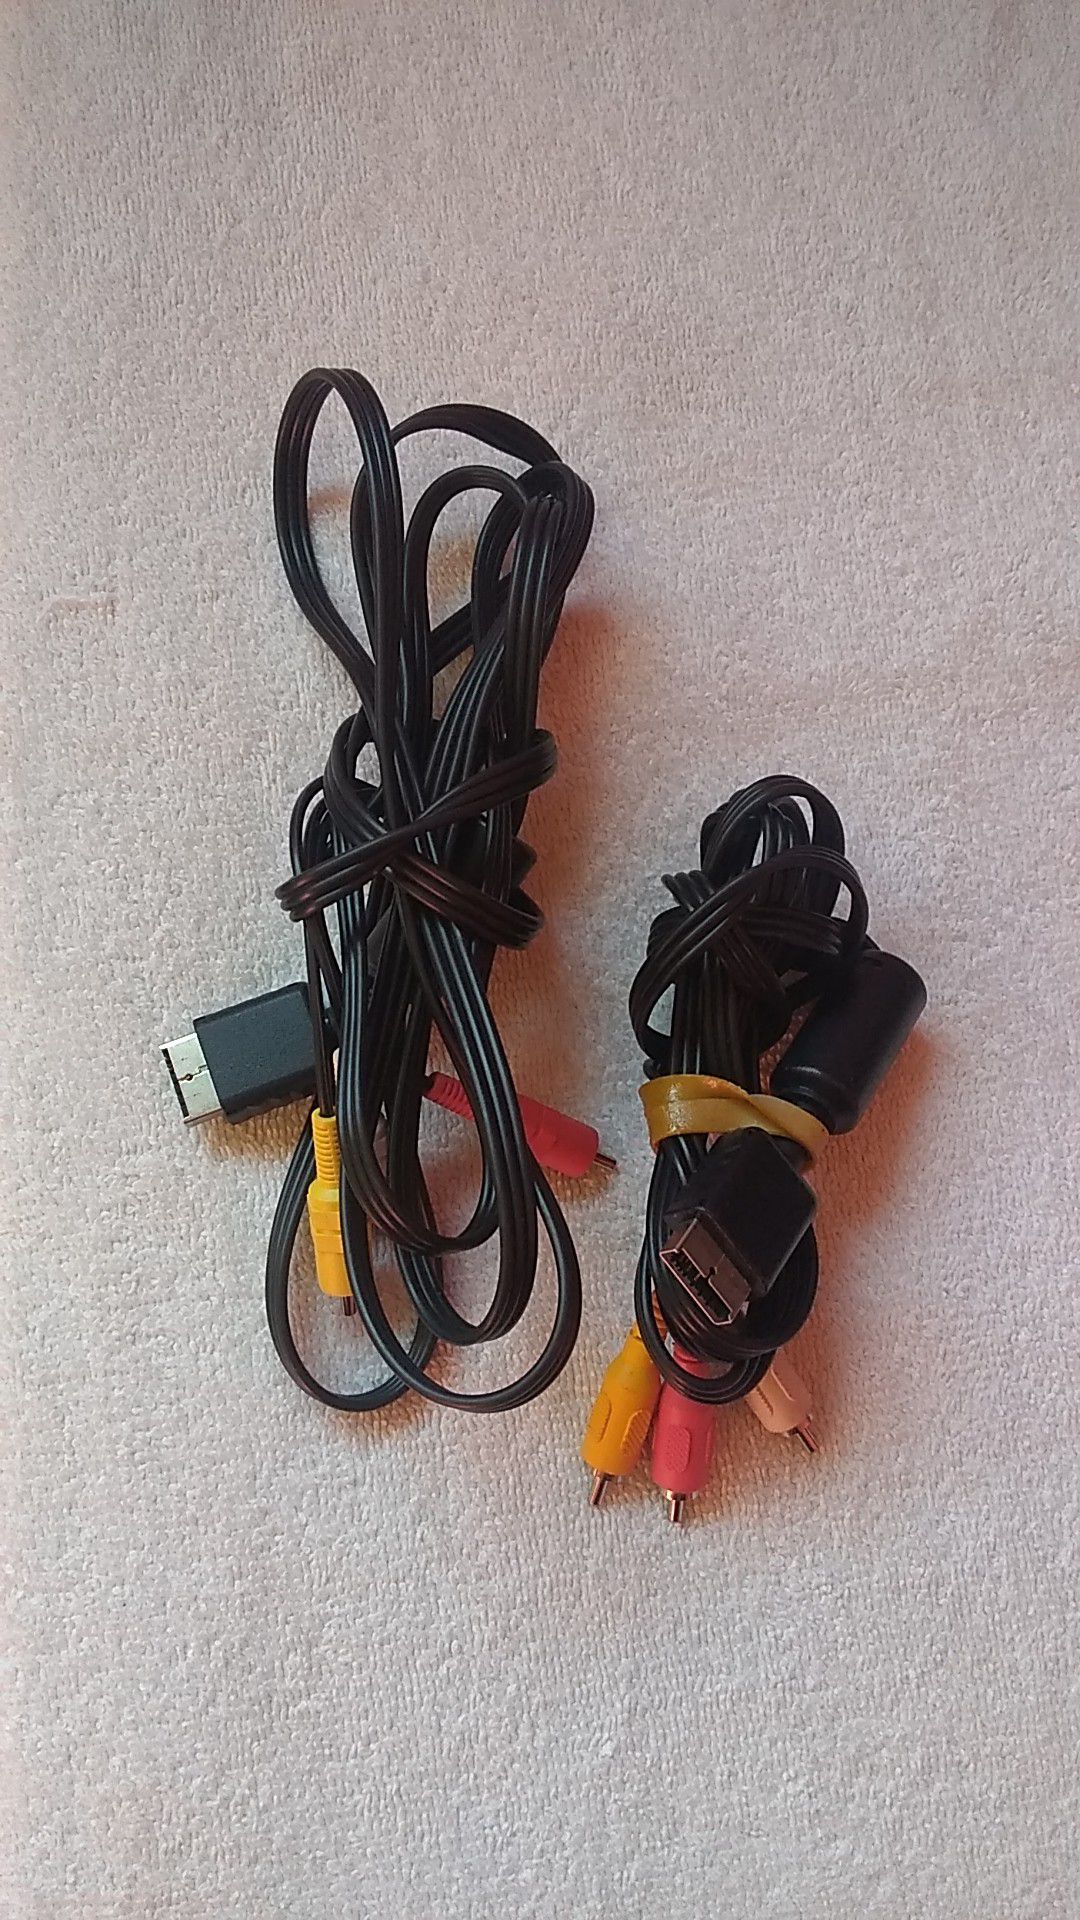 PS2 cables